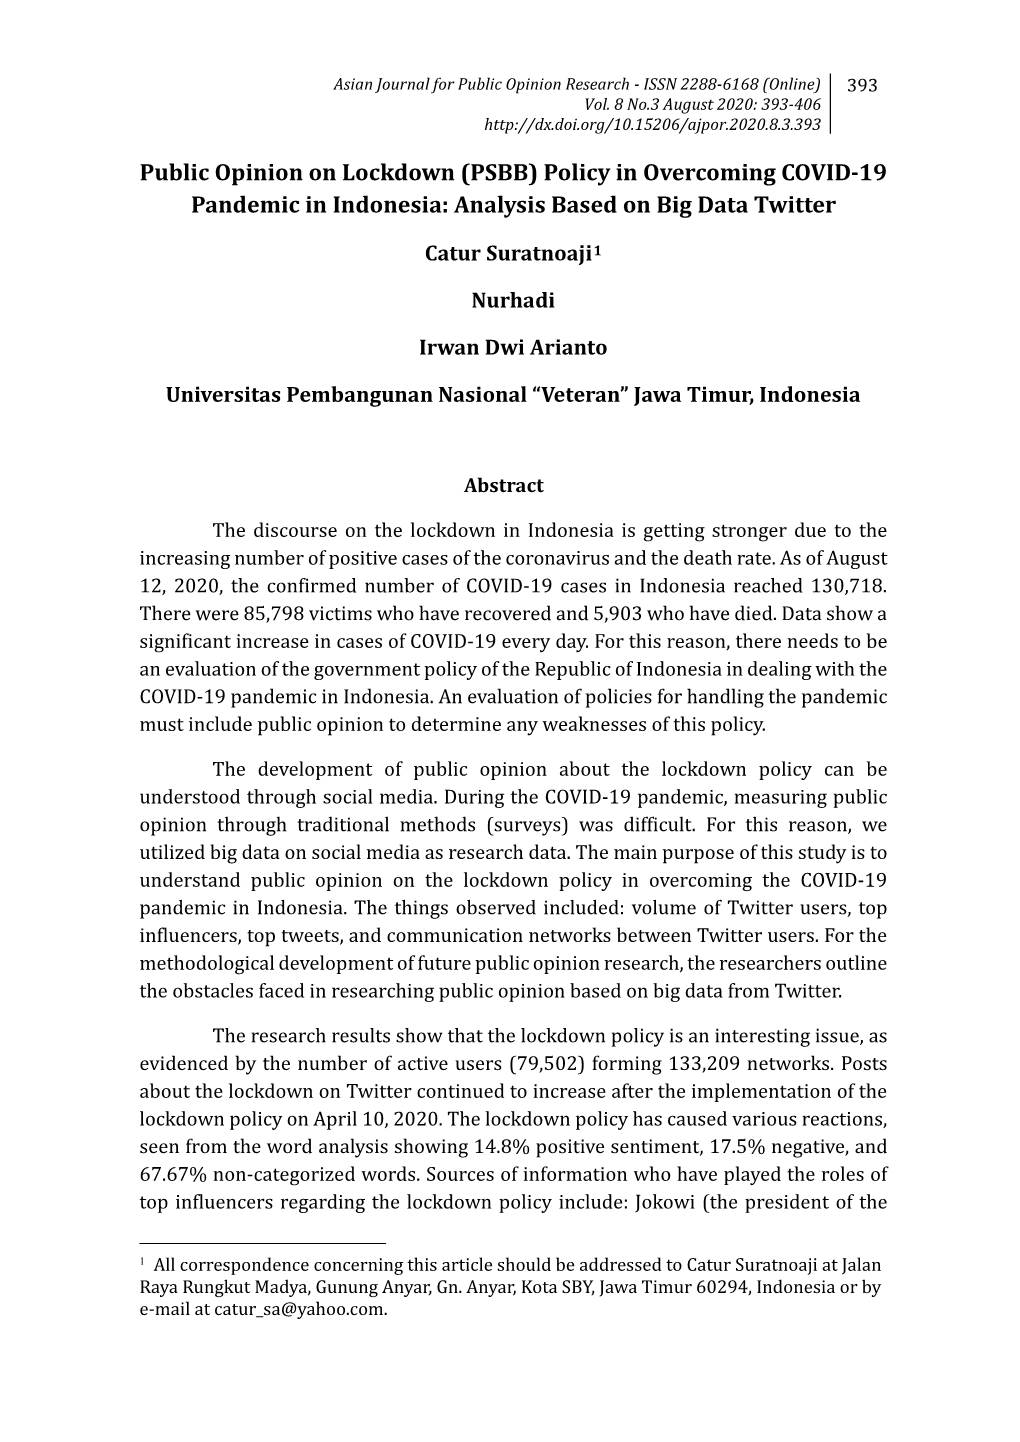 Public Opinion on Lockdown (PSBB) Policy in Overcoming COVID-19 Pandemic in Indonesia: Analysis Based on Big Data Twitter